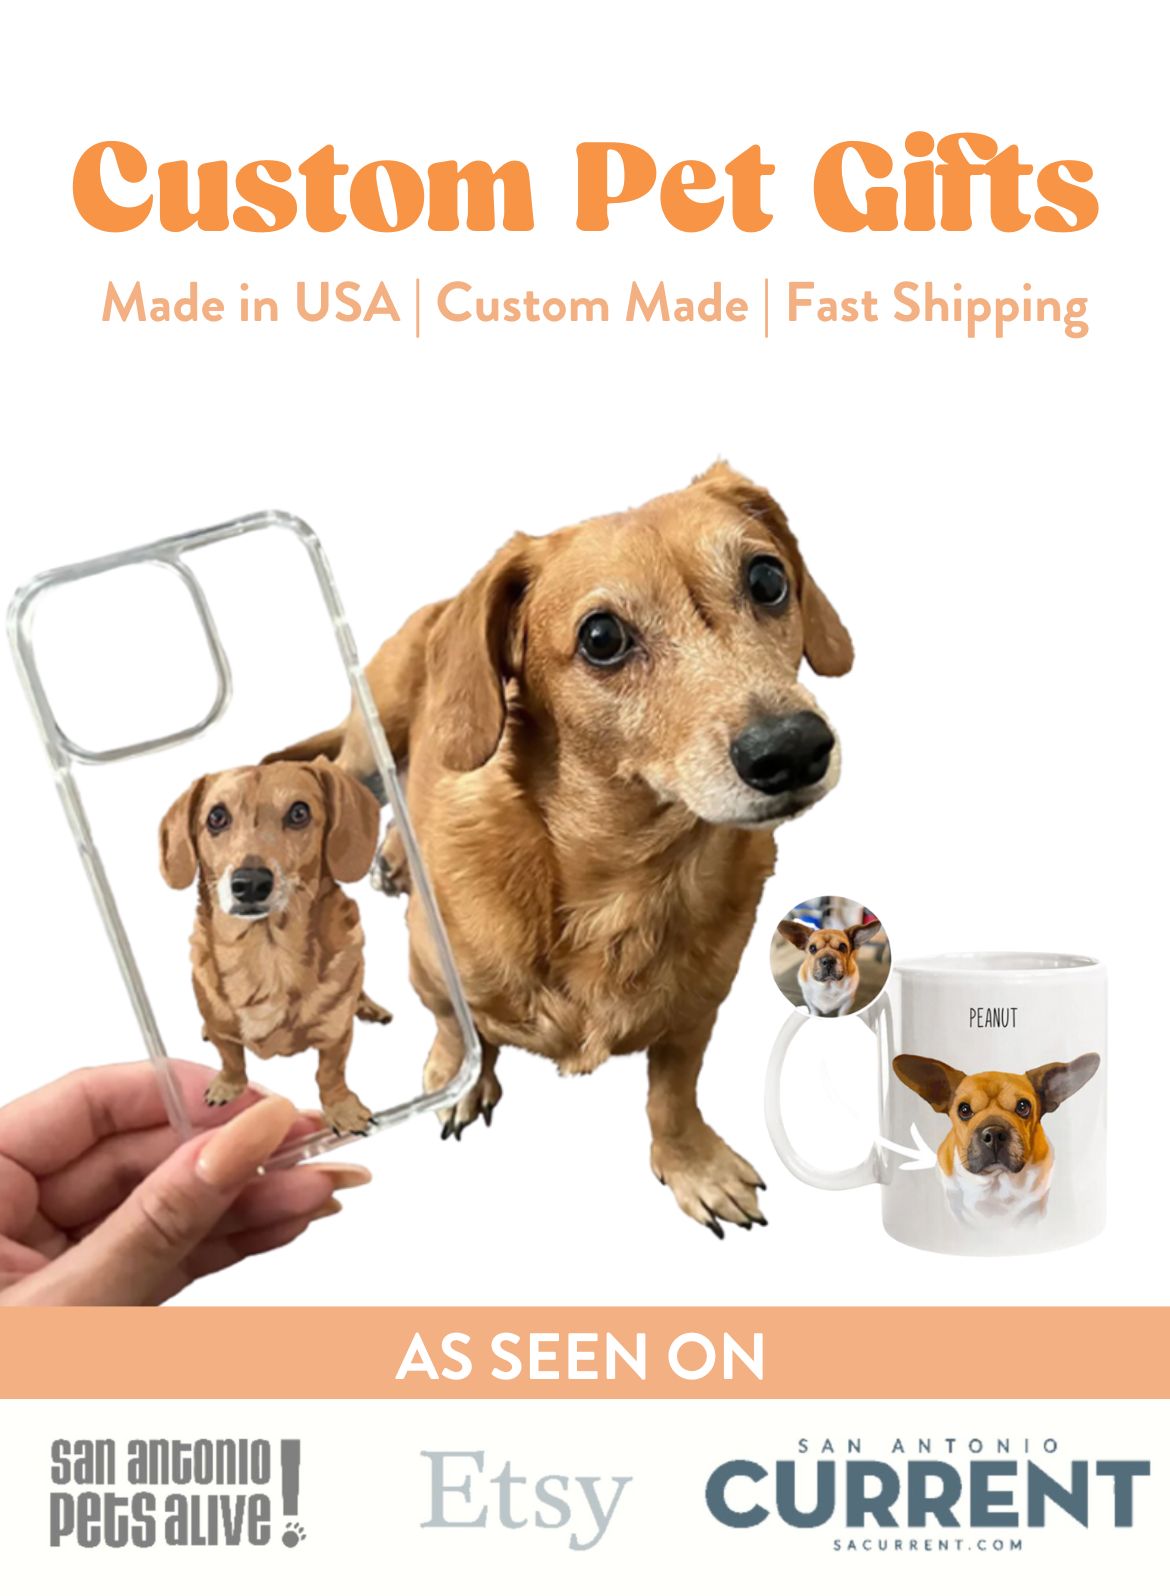 budget friendly custom pet gifts for your favorite human